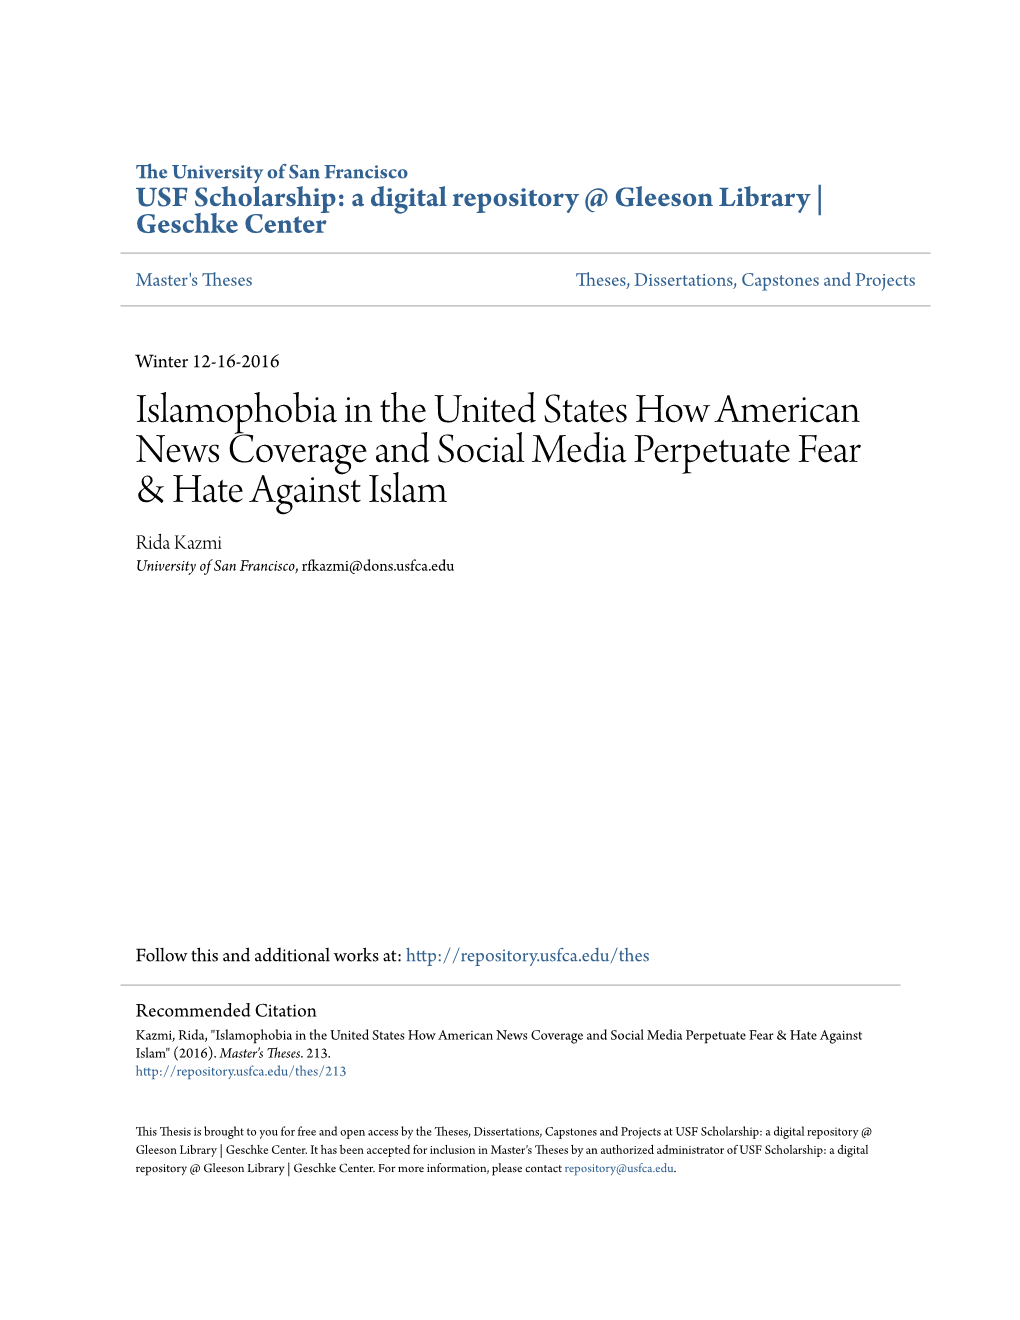 Islamophobia in the United States How American News Coverage And